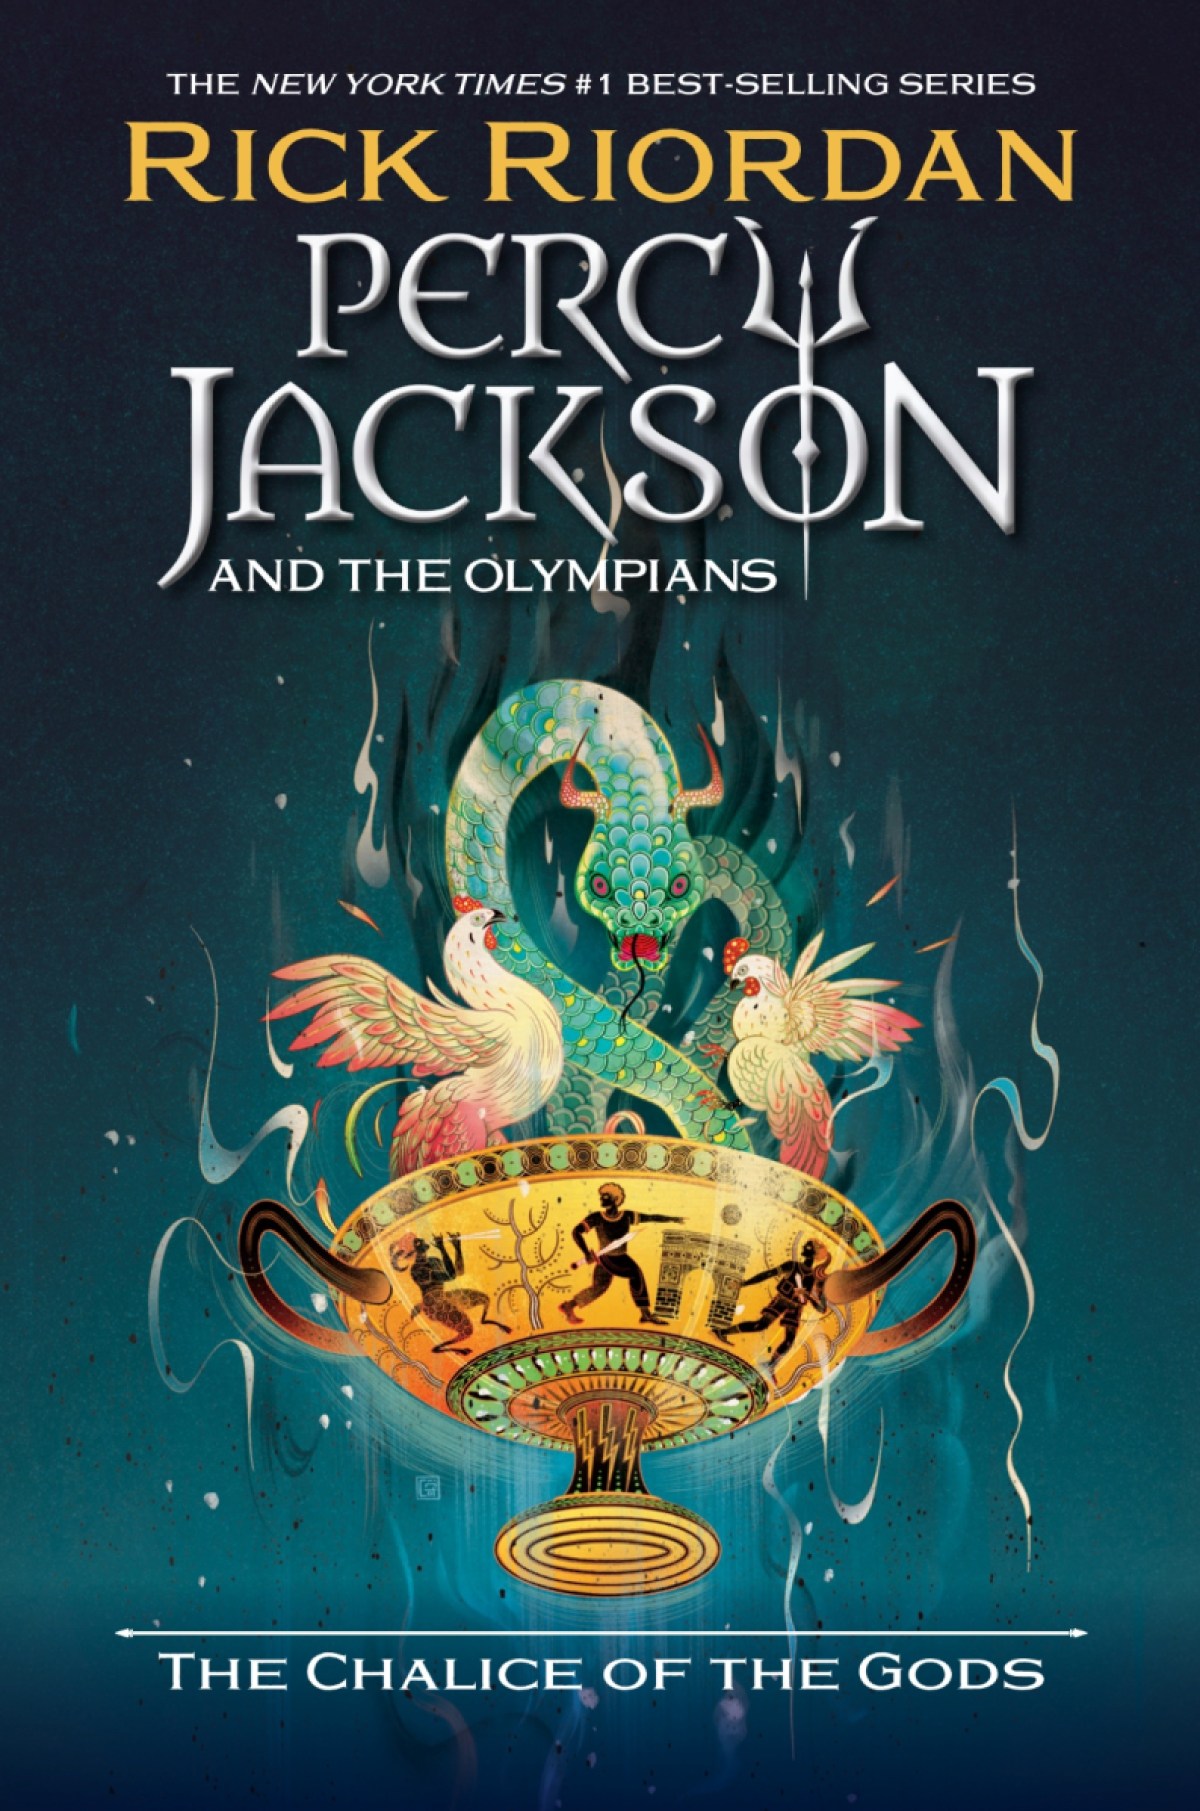 Percy Jackson and the Olympians Book 6 - The Chalice of the Gods cover art (Disney Hyperion)